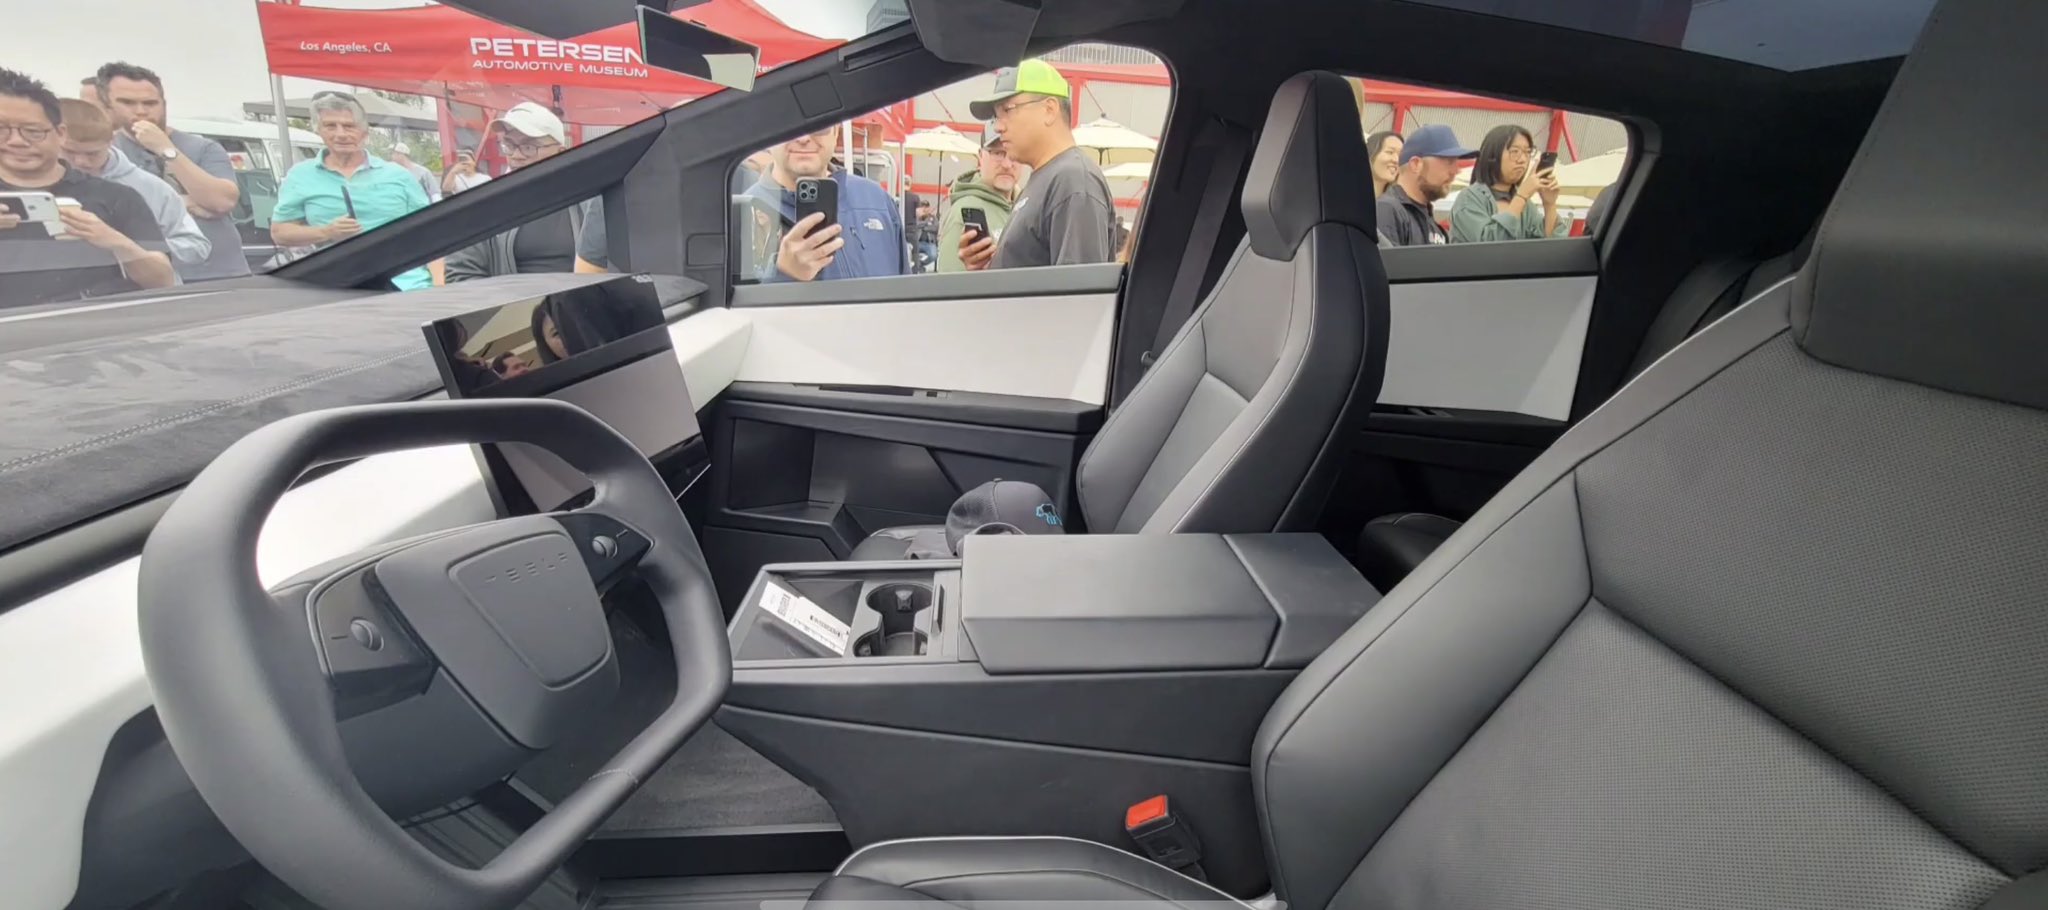 Tesla Cybertruck Buyers Face Steering Nightmares: Imported Parts Question ‘Made in America’ Promise